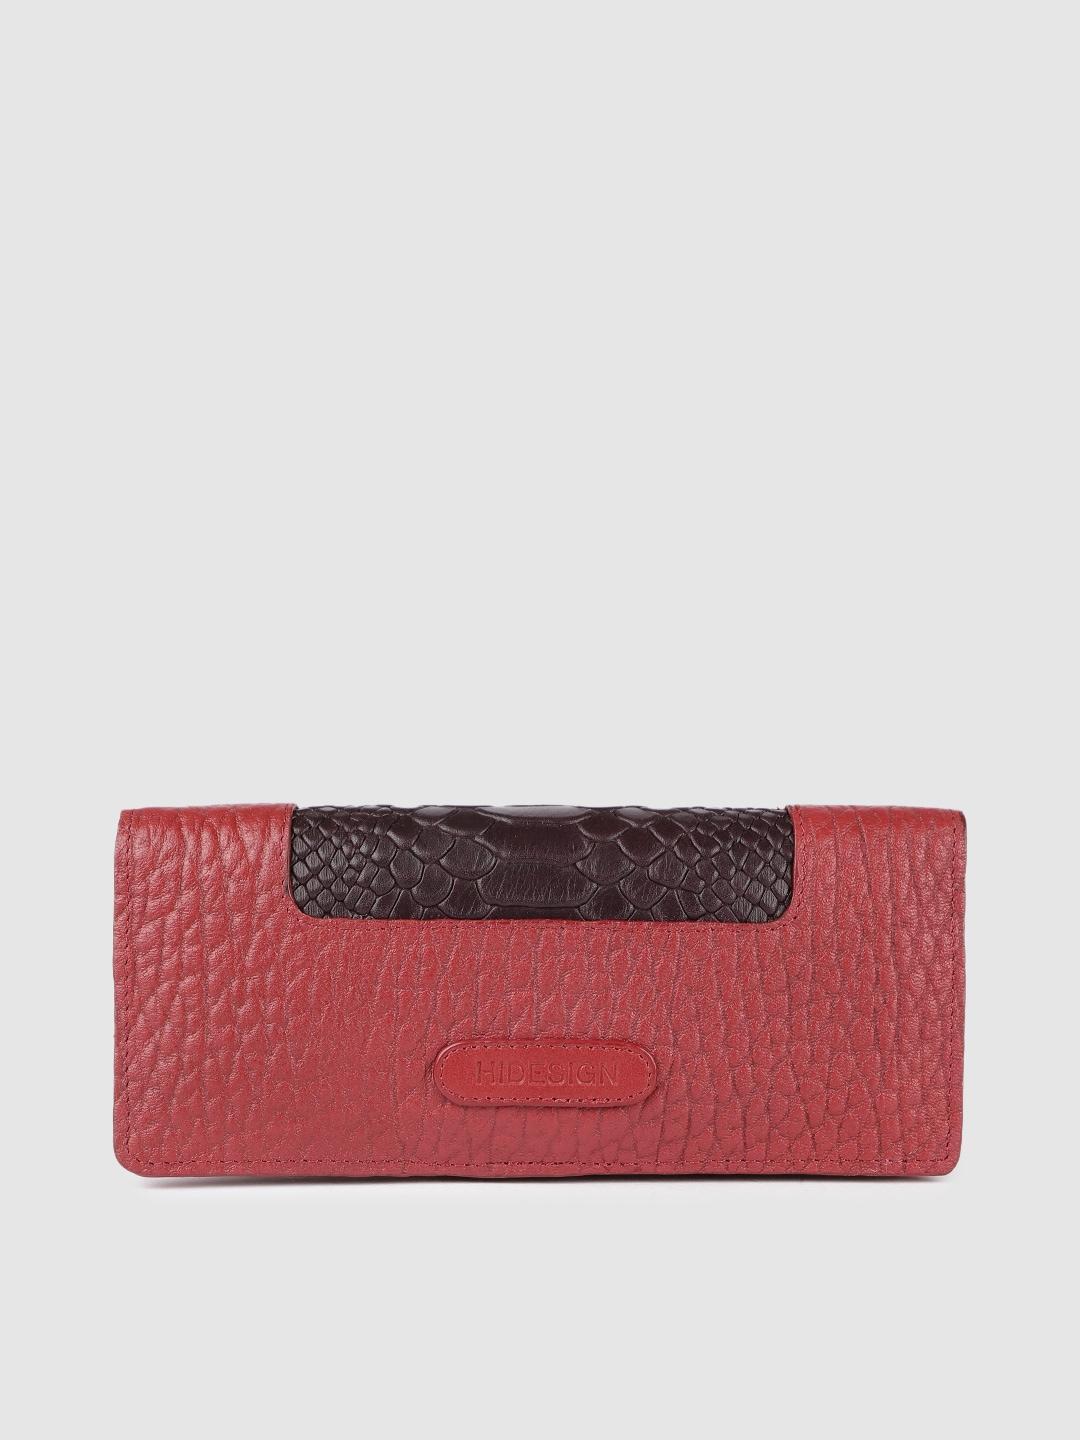 hidesign women red leather textured two fold wallet